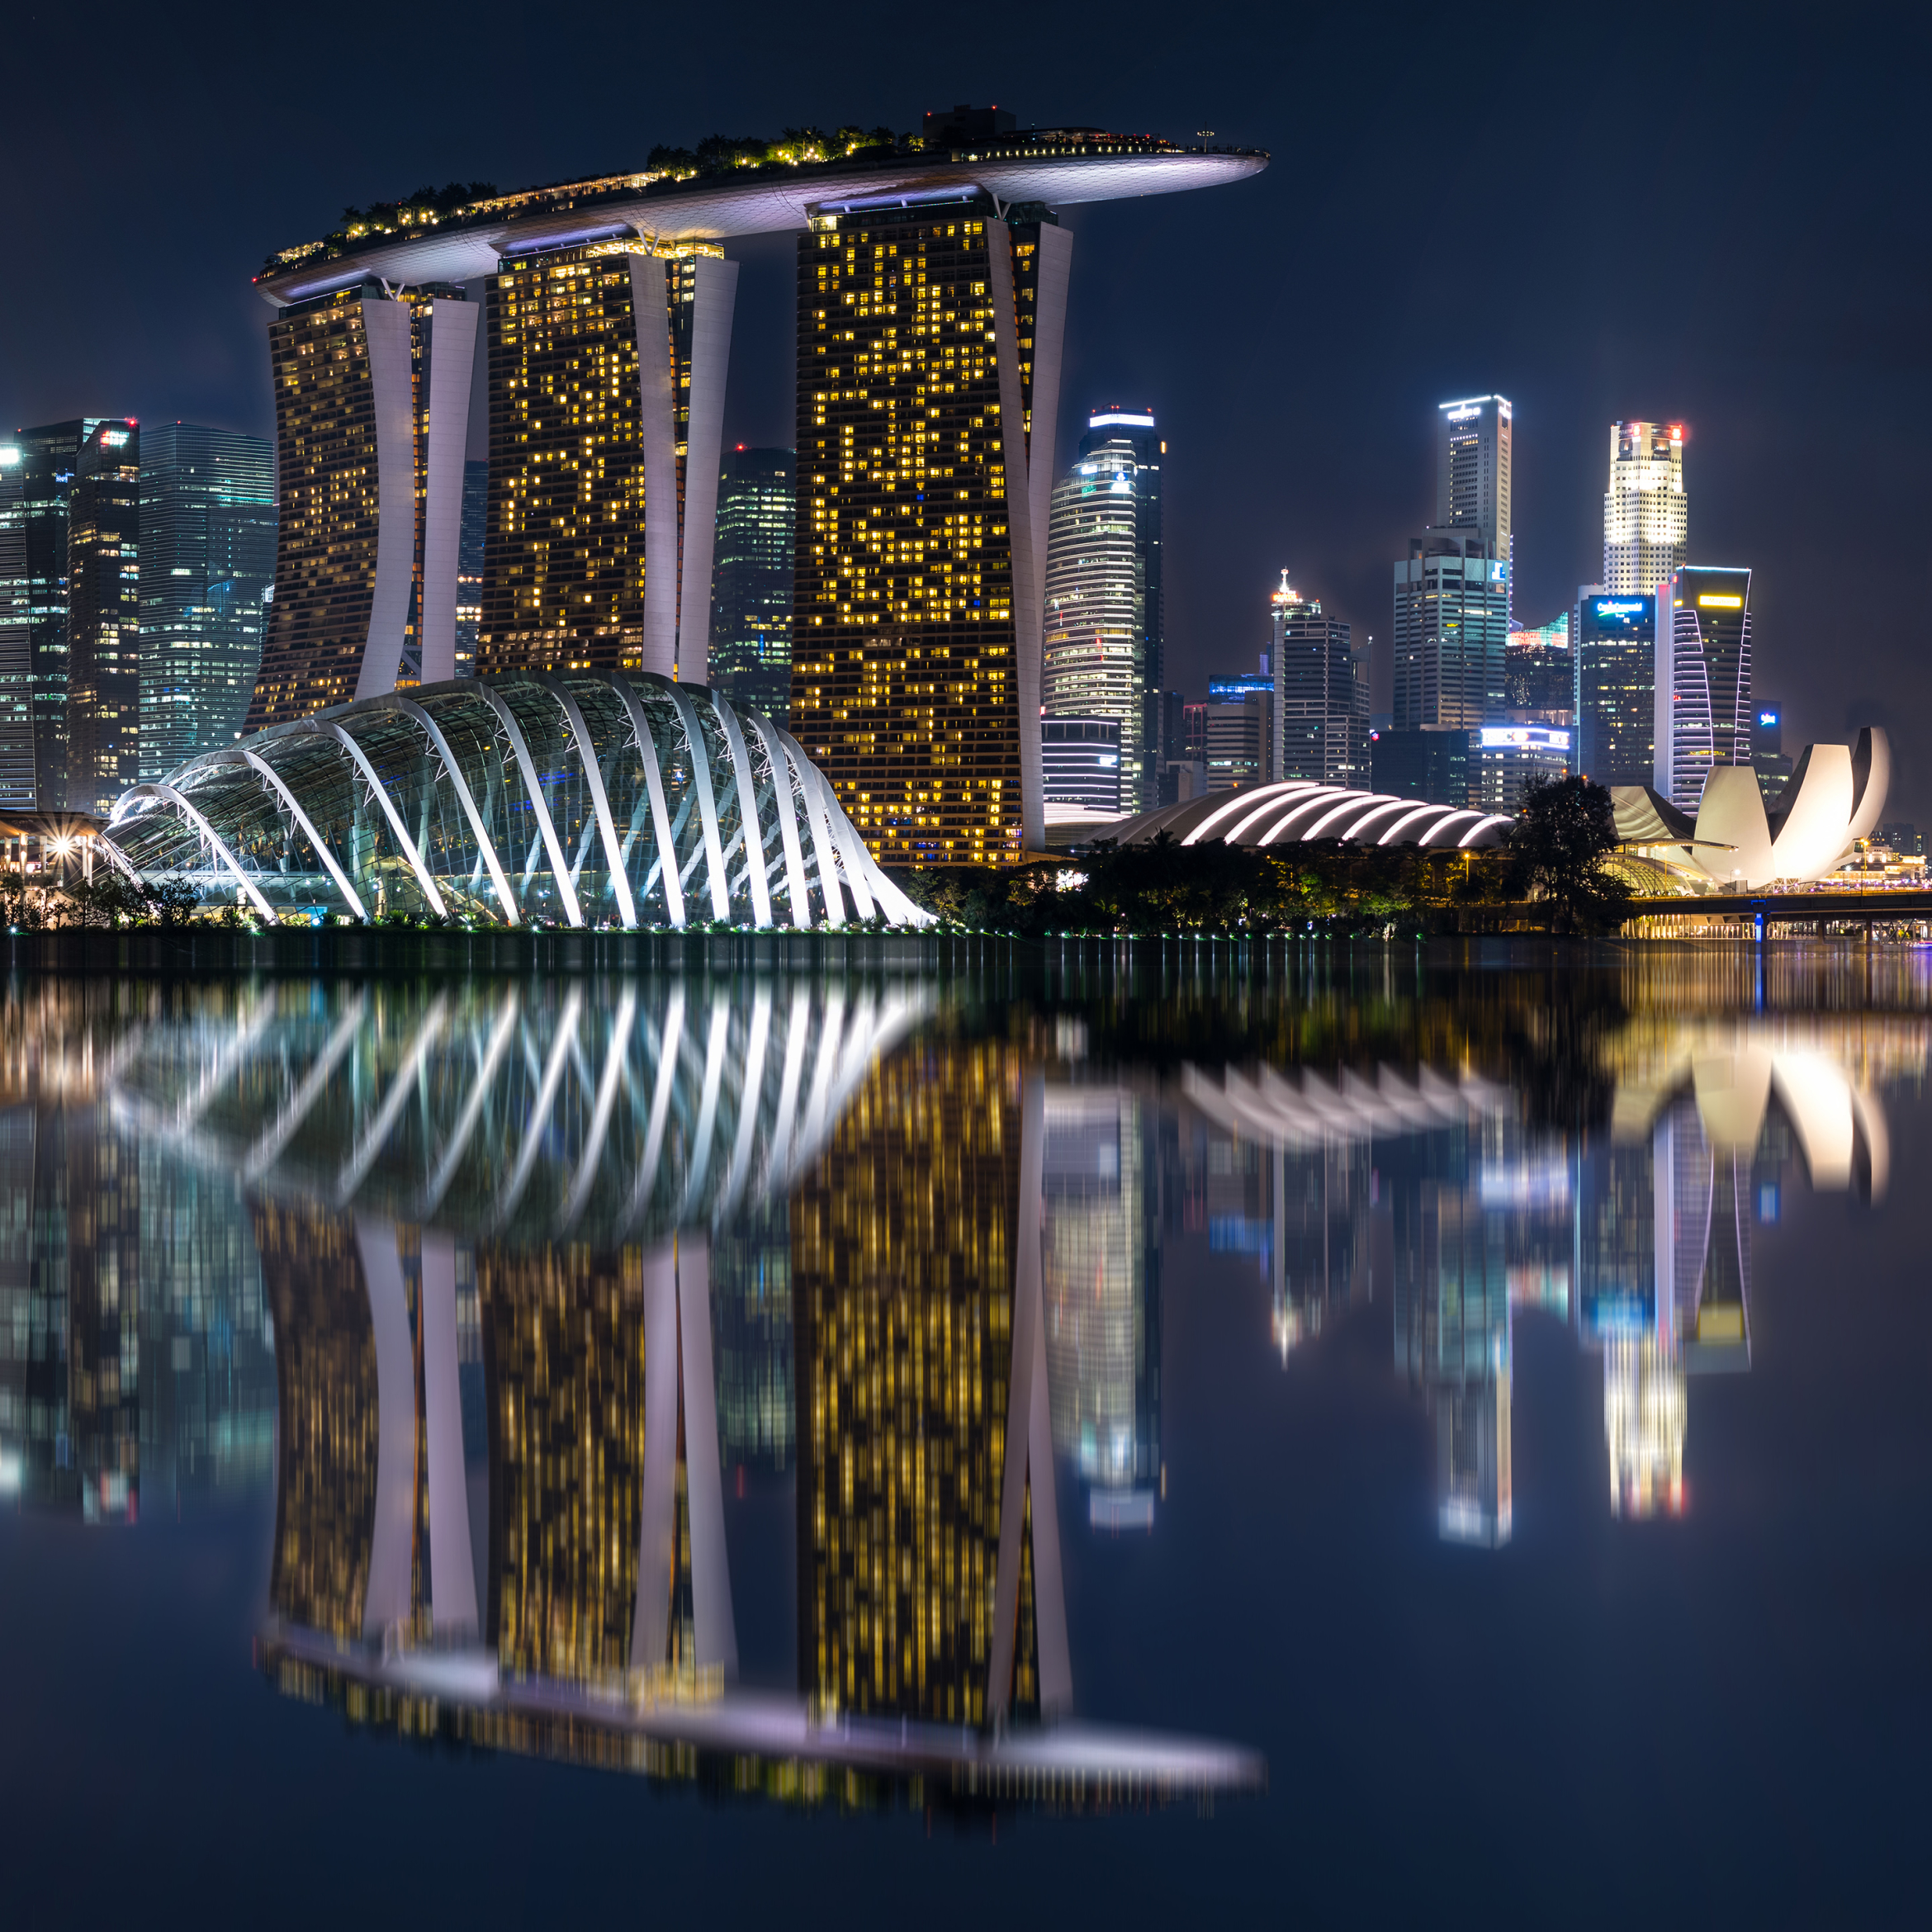 Marina Bay Sands, Singapore by Kenneth Neo